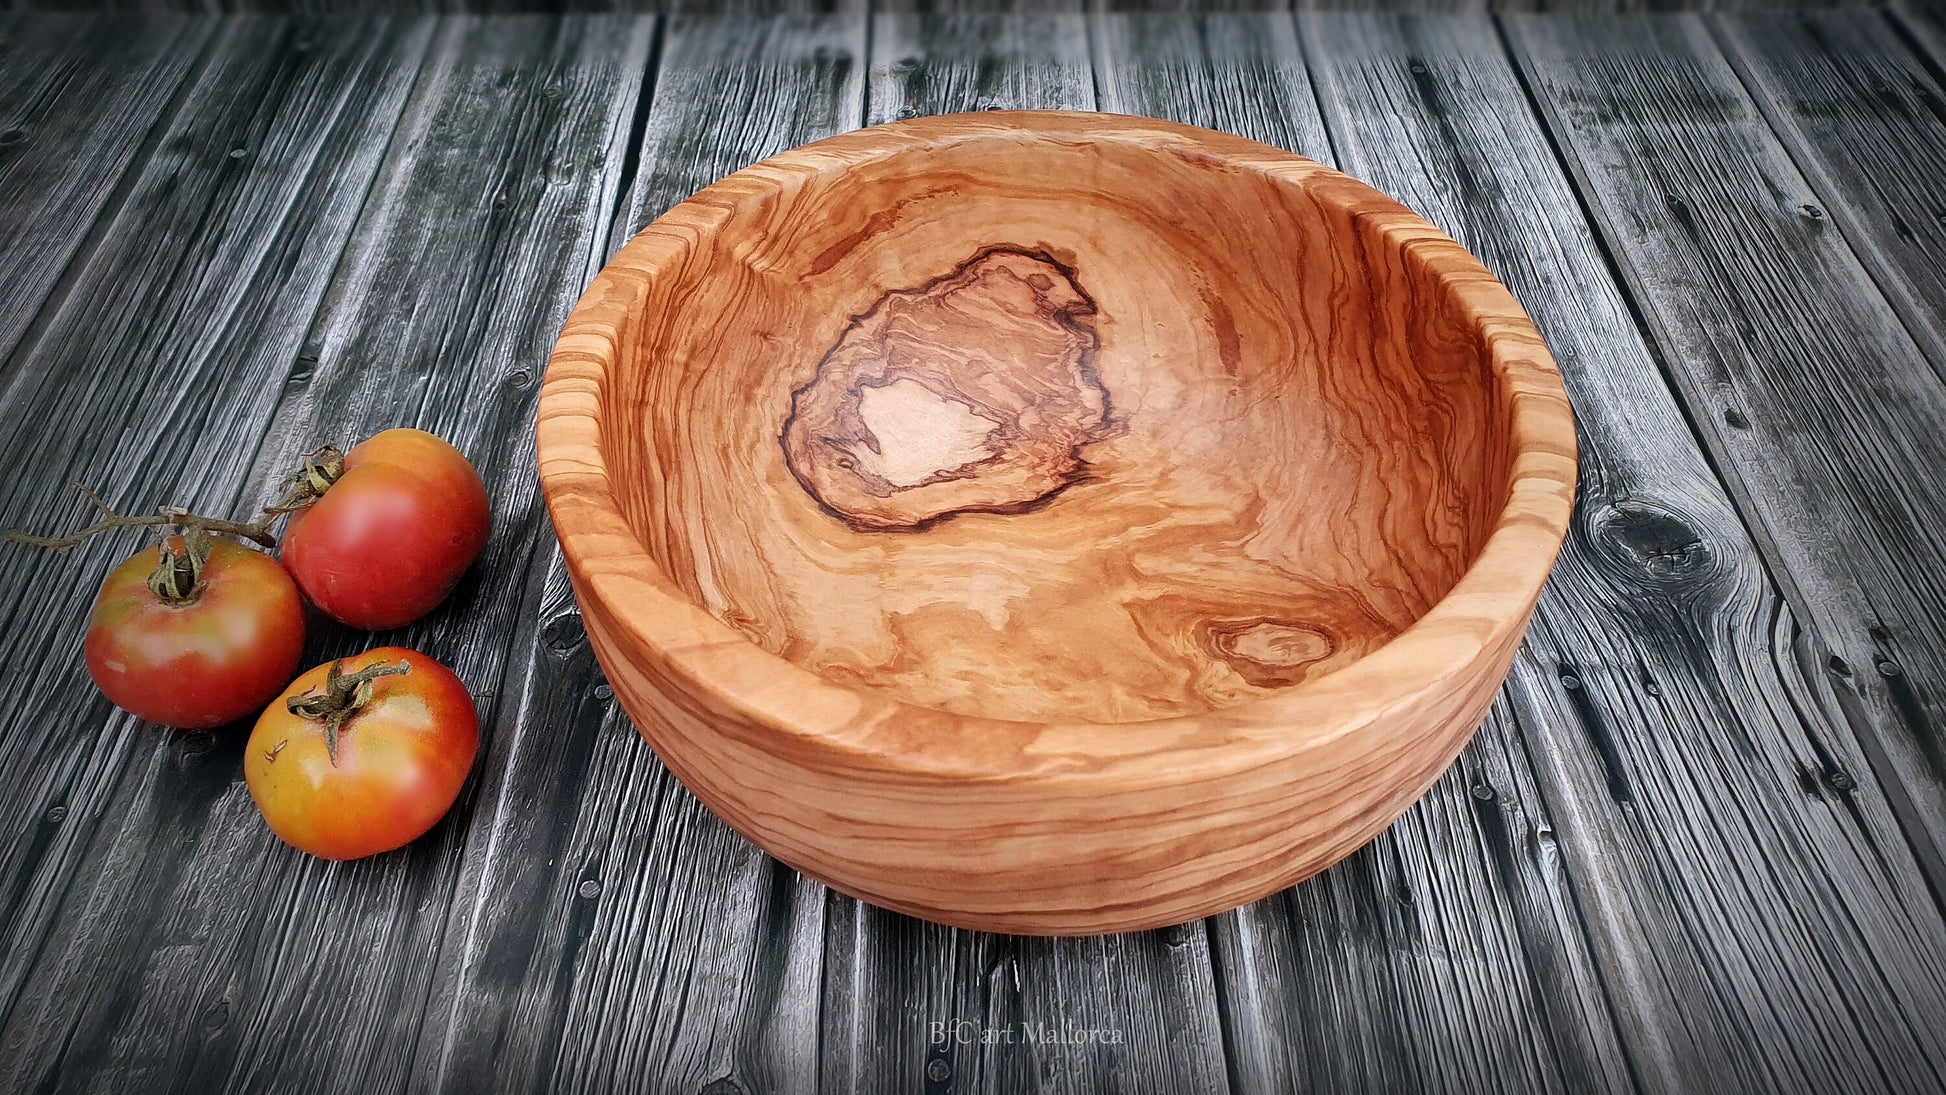 Salad Bowl with Servers spoons set Olive Wood, Wooden Bowls handmade with Serving Spoons for Salads and Pasta Serving Bowls